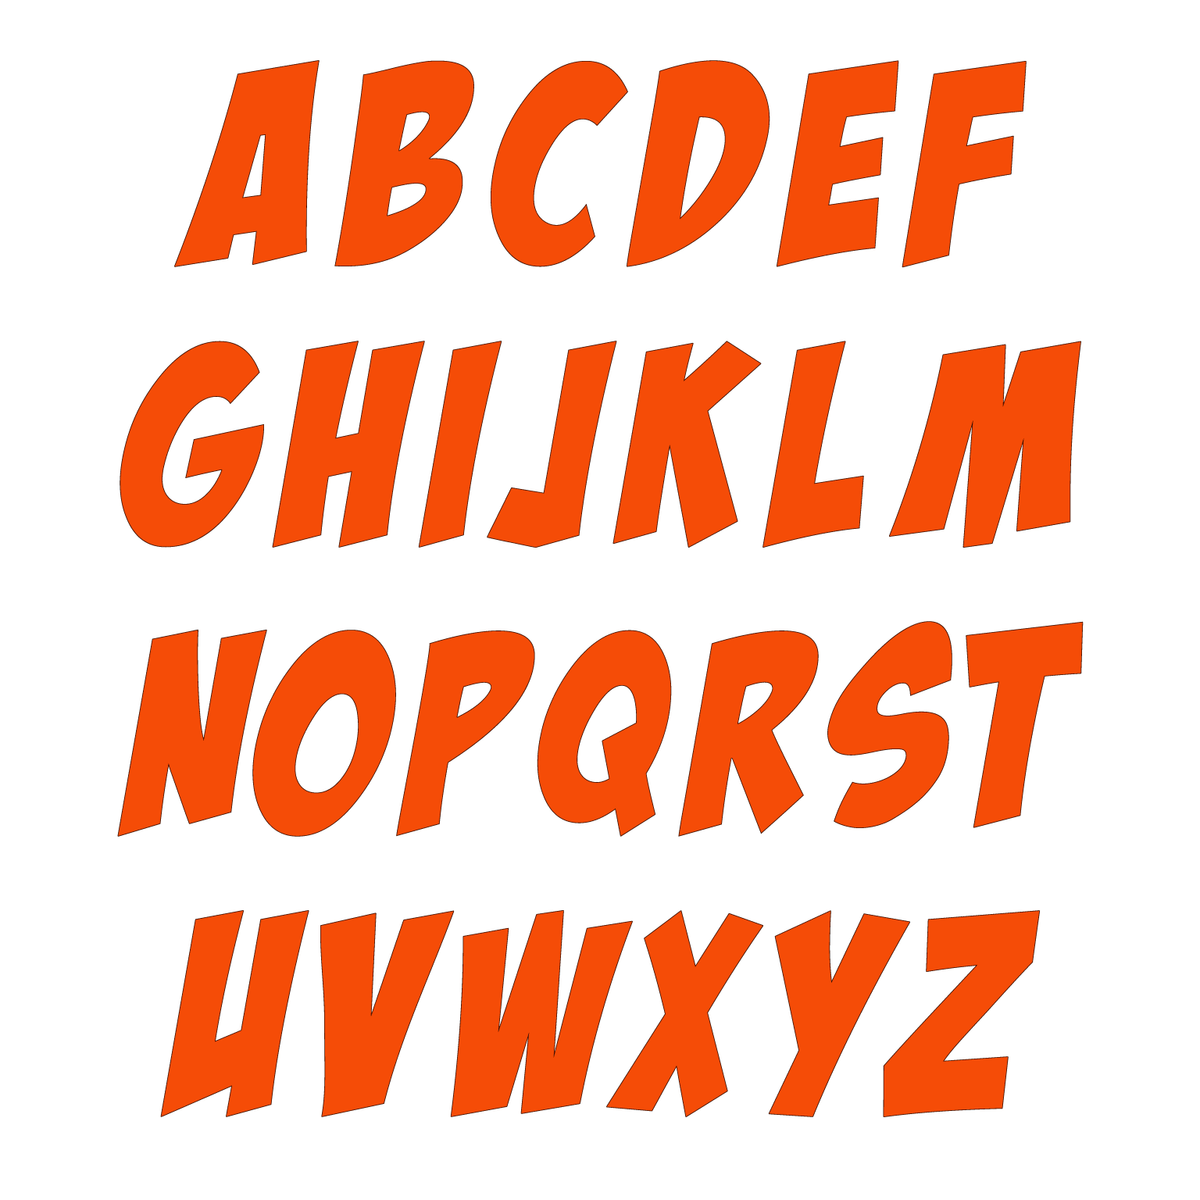 The Small Action Comic Flexabet Silicone Letter Cutter produces Perfectly Cut Letters, as seen in this image, by Marvelous Molds